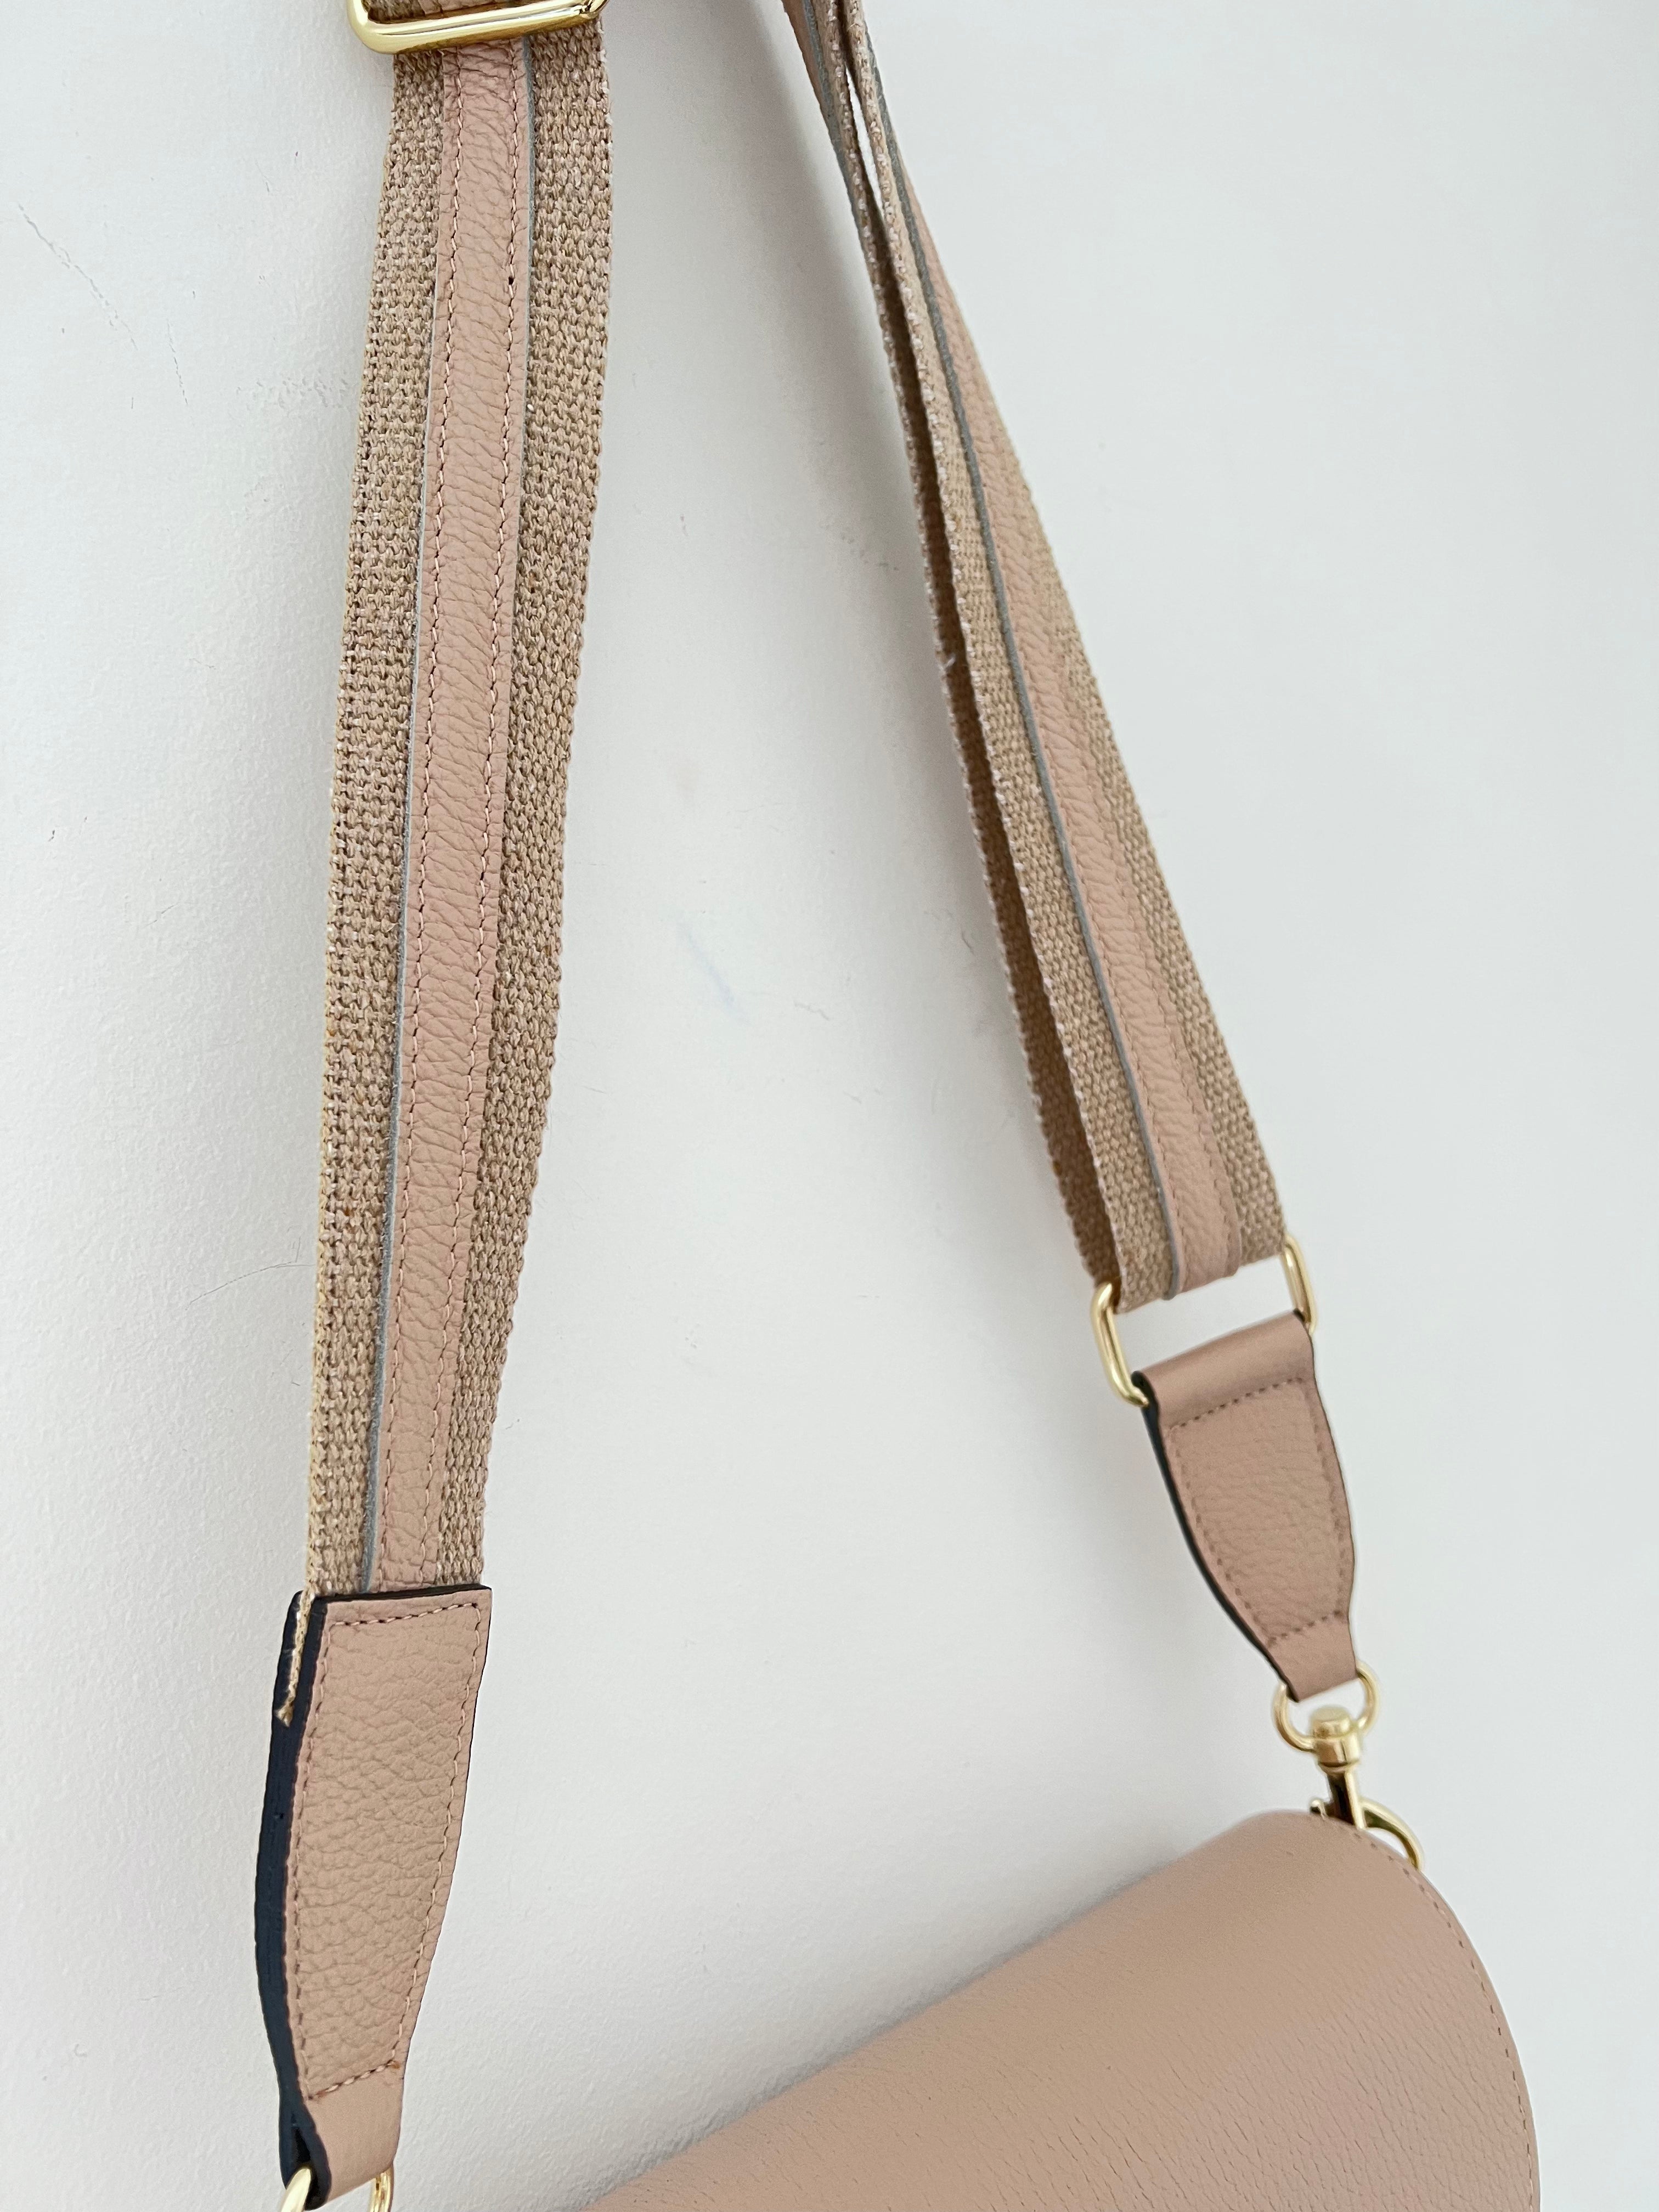 Pebble Leather Crossbody Bag in Nude